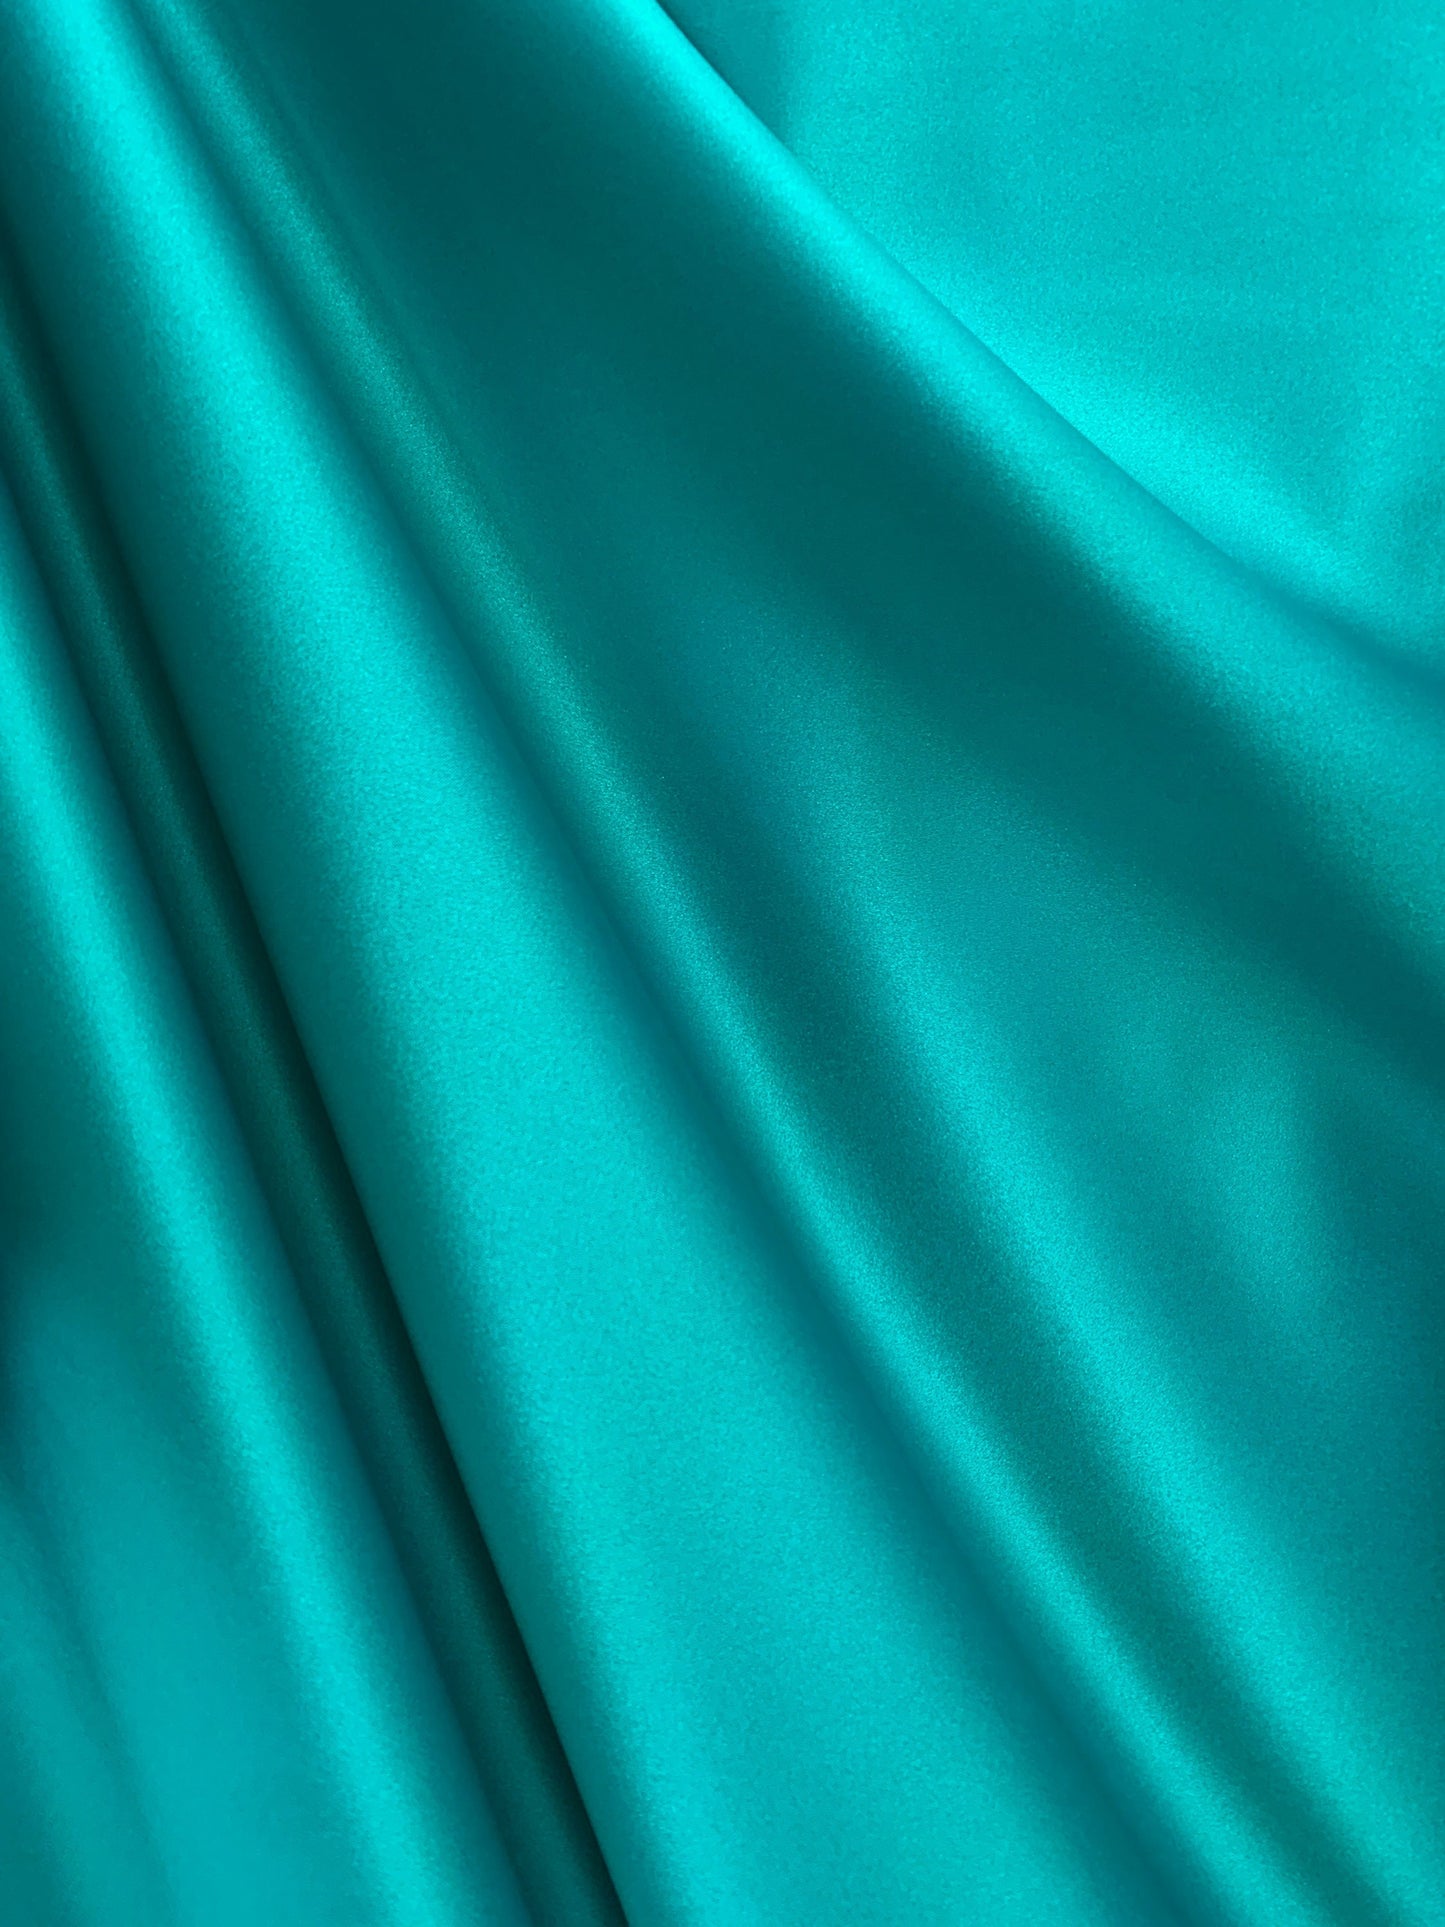 TEAL BLUE Solid 100% Polyester Mystique Satin Fabric (60 in.) Sold By The Yard